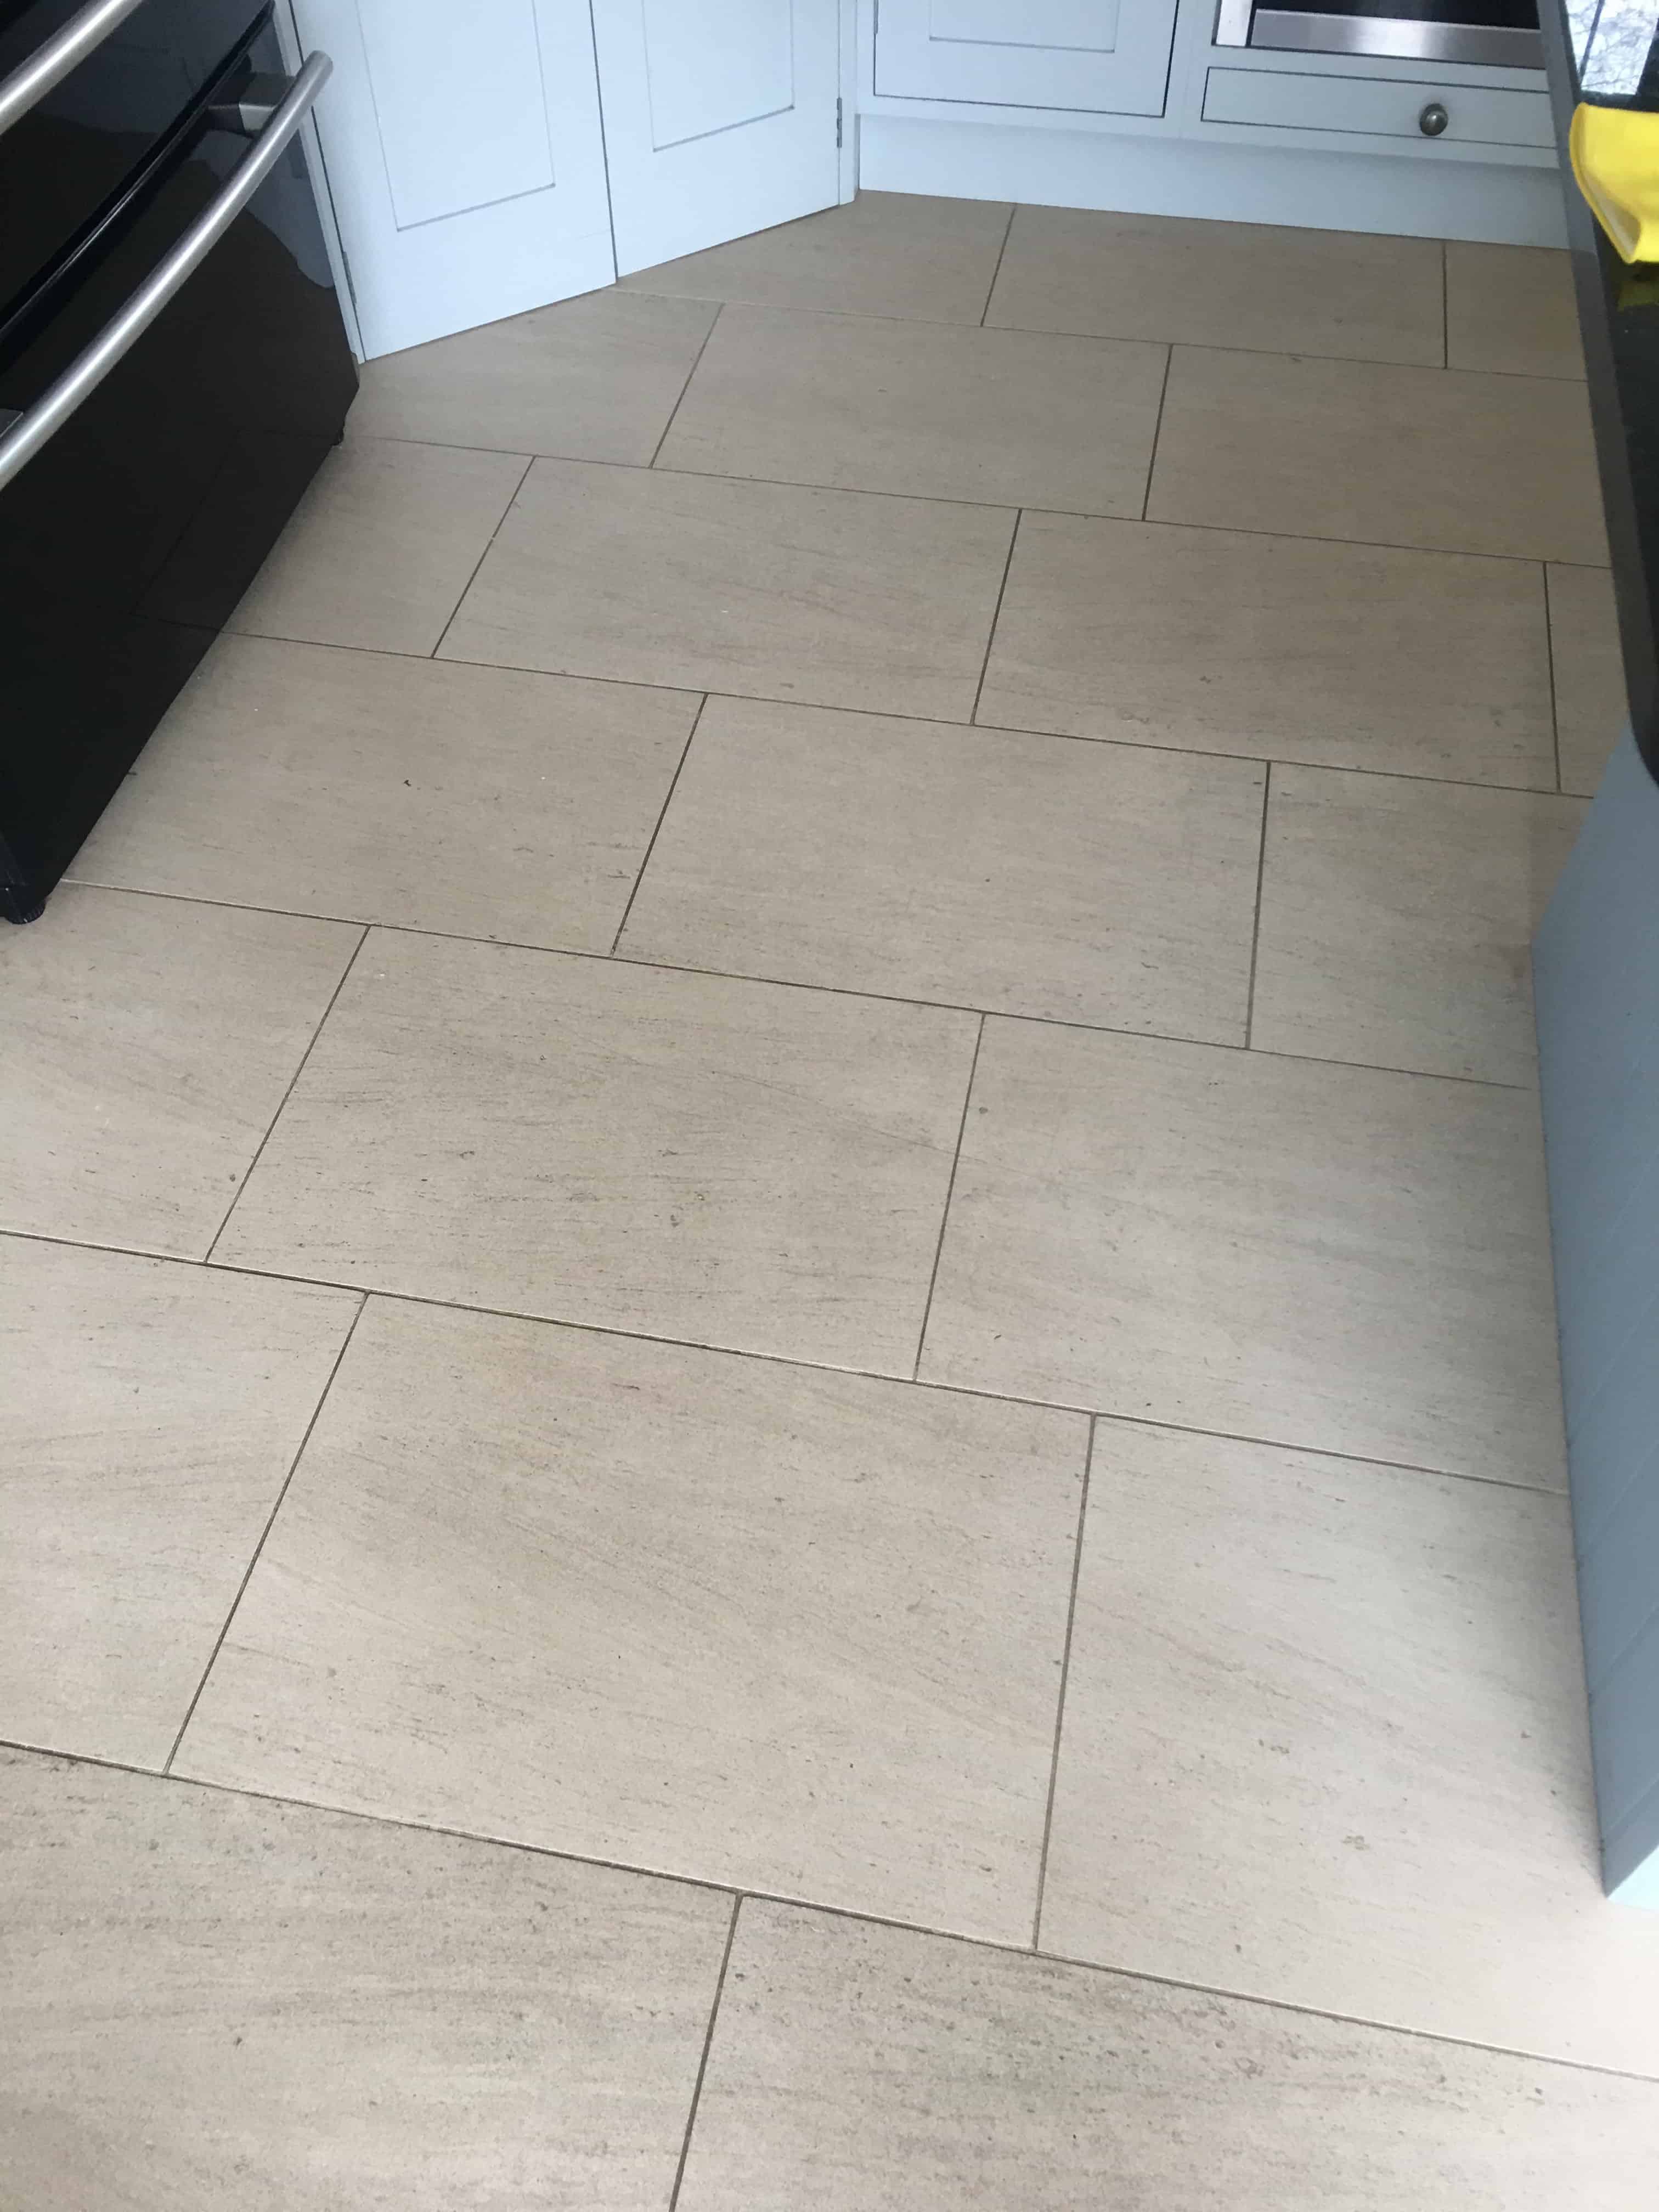 Limestone Floor Tile and Grout Before Cleaning in Underriver Sevenoaks